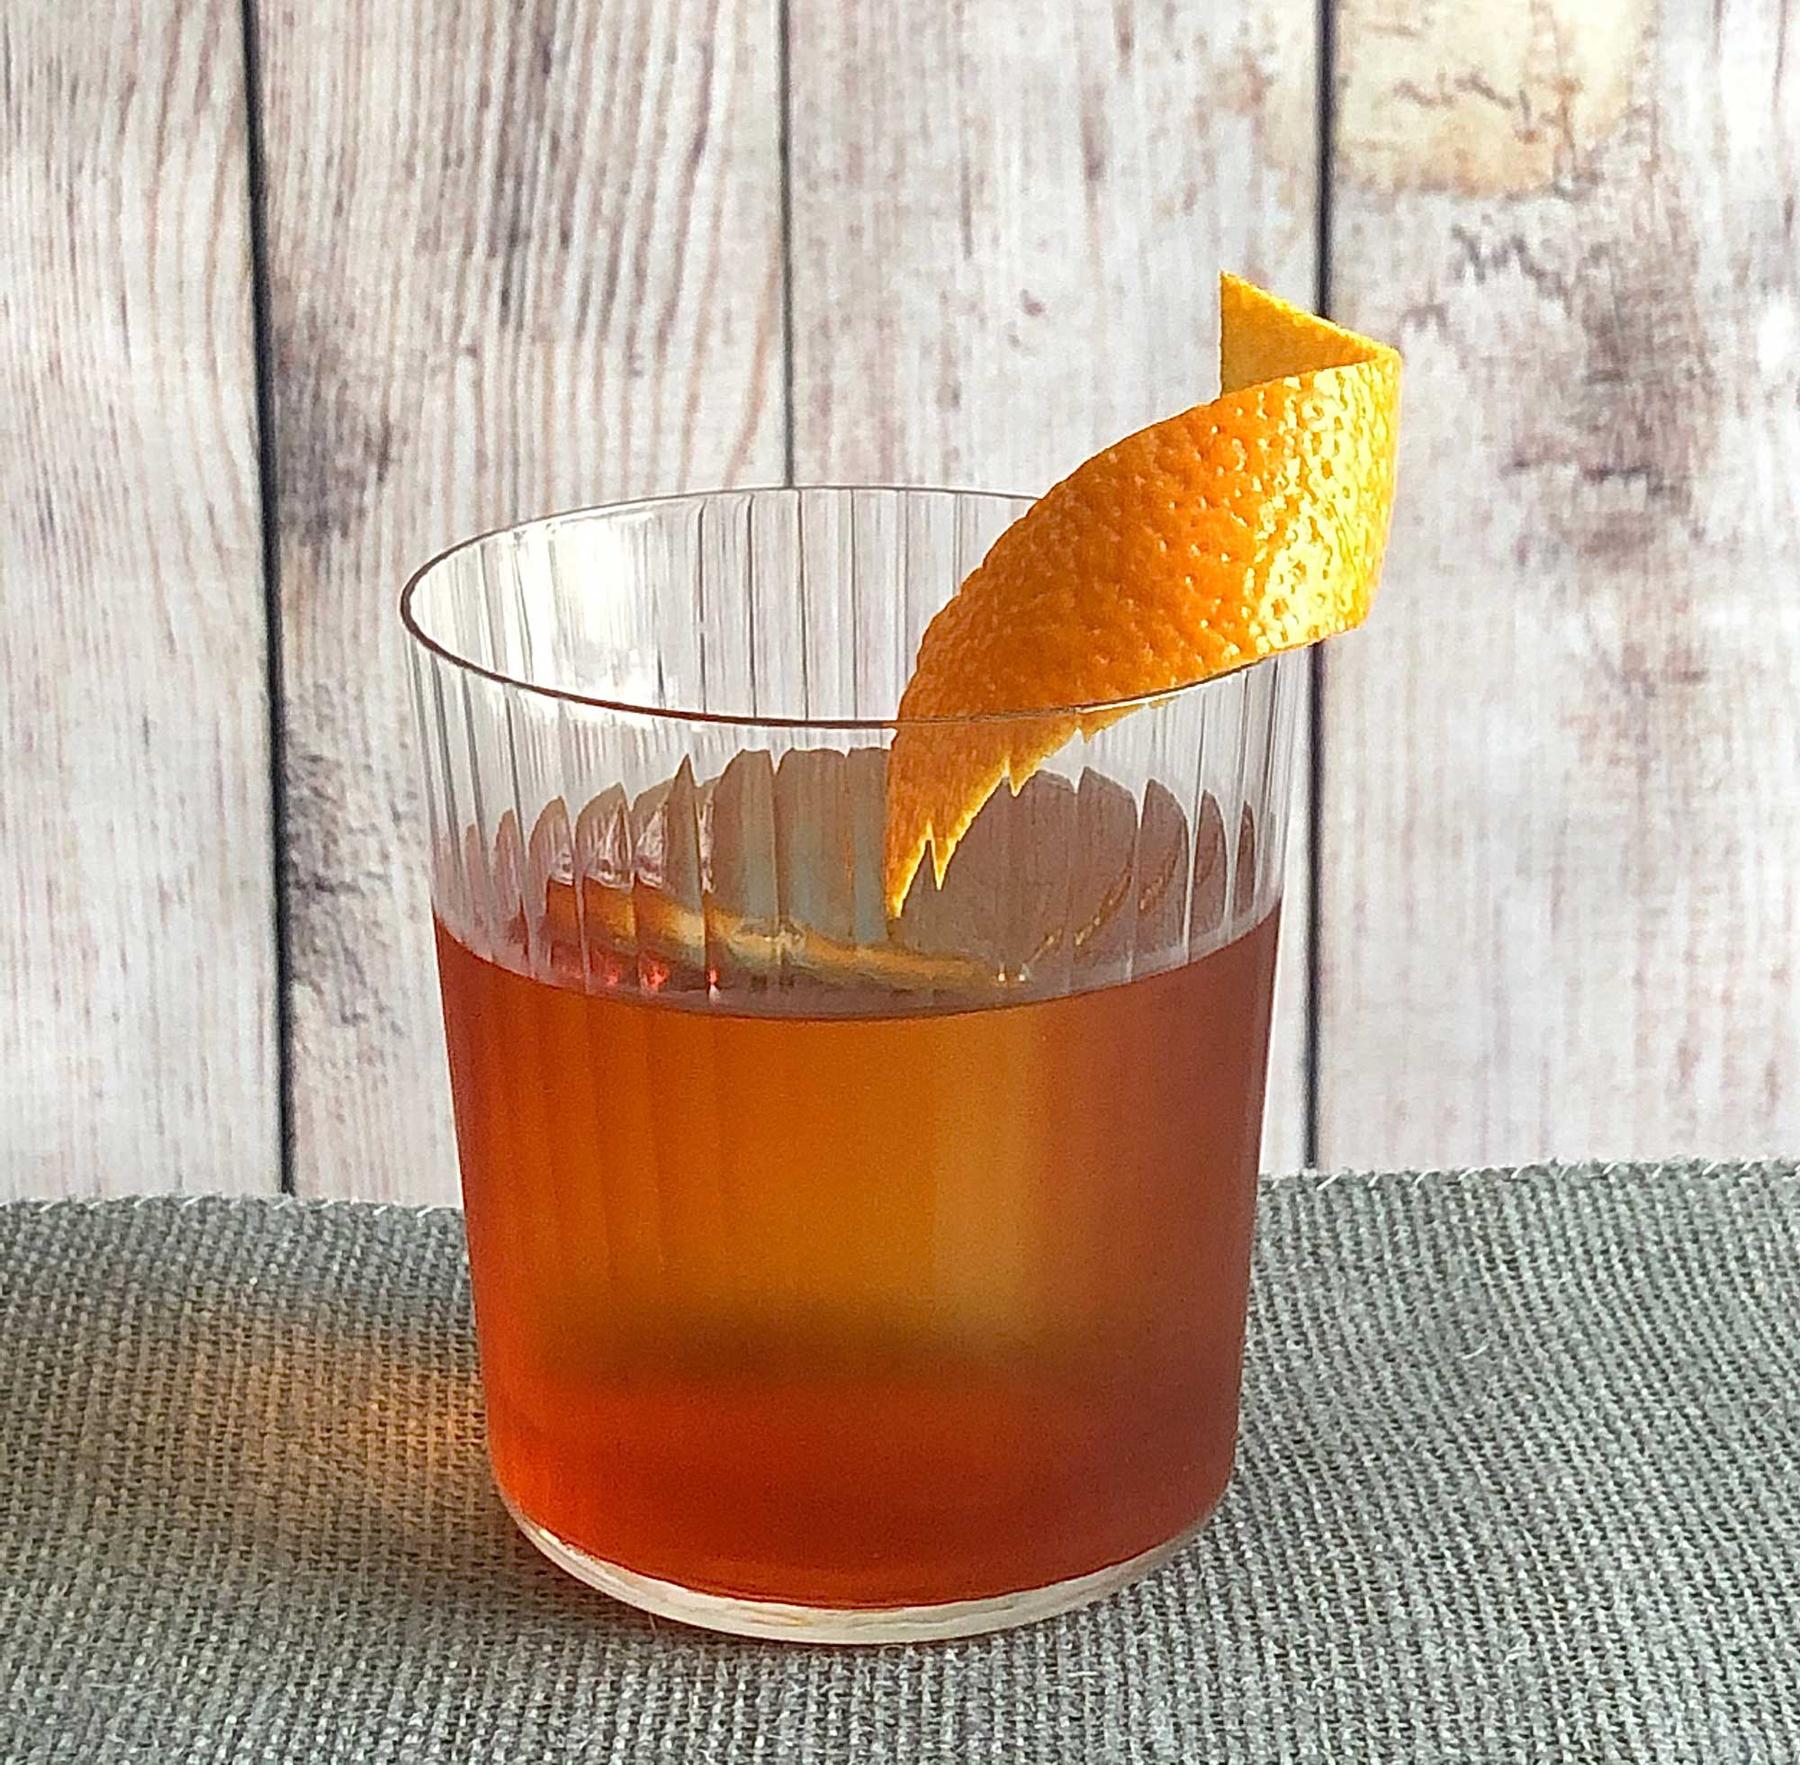 An example of the Boulevardier, the mixed drink (drink) featuring Mattei Cap Corse Rouge Quinquina, Aperitivo Cappelletti, rye whiskey, and orange twist; photo by Lee Edwards